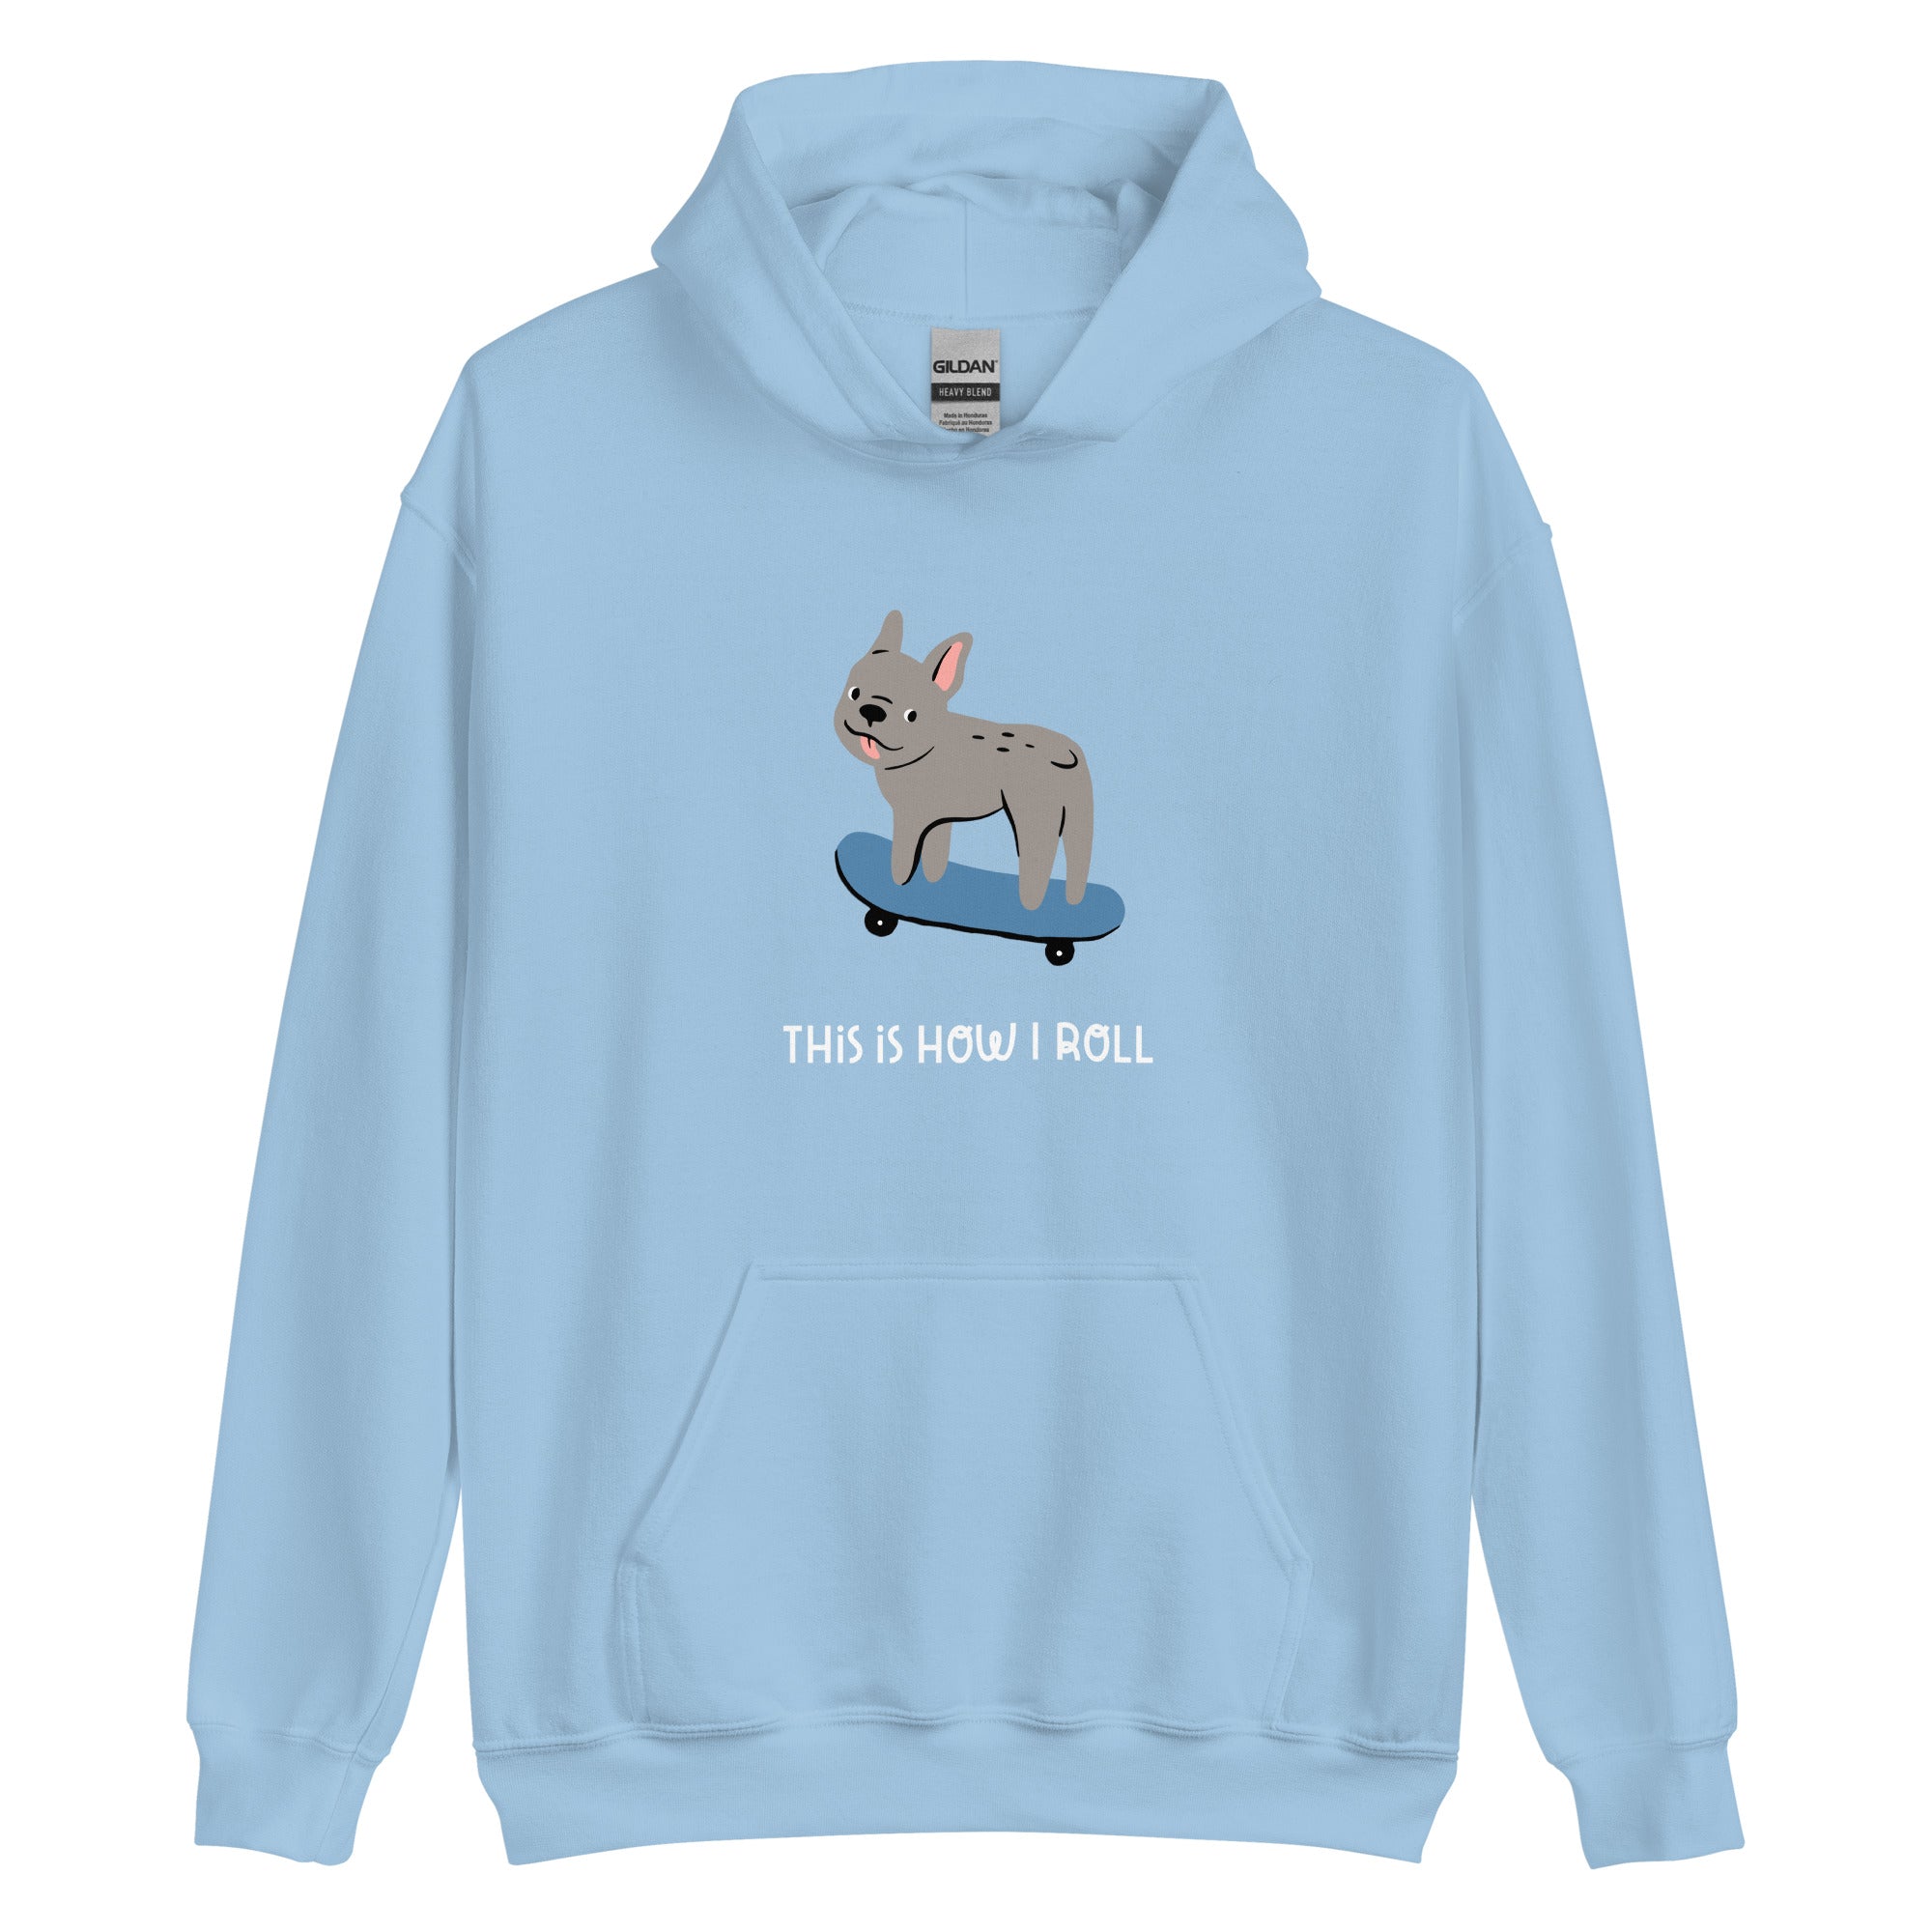 This is how I roll - skateboard Frenchie design Unisex Hoodie